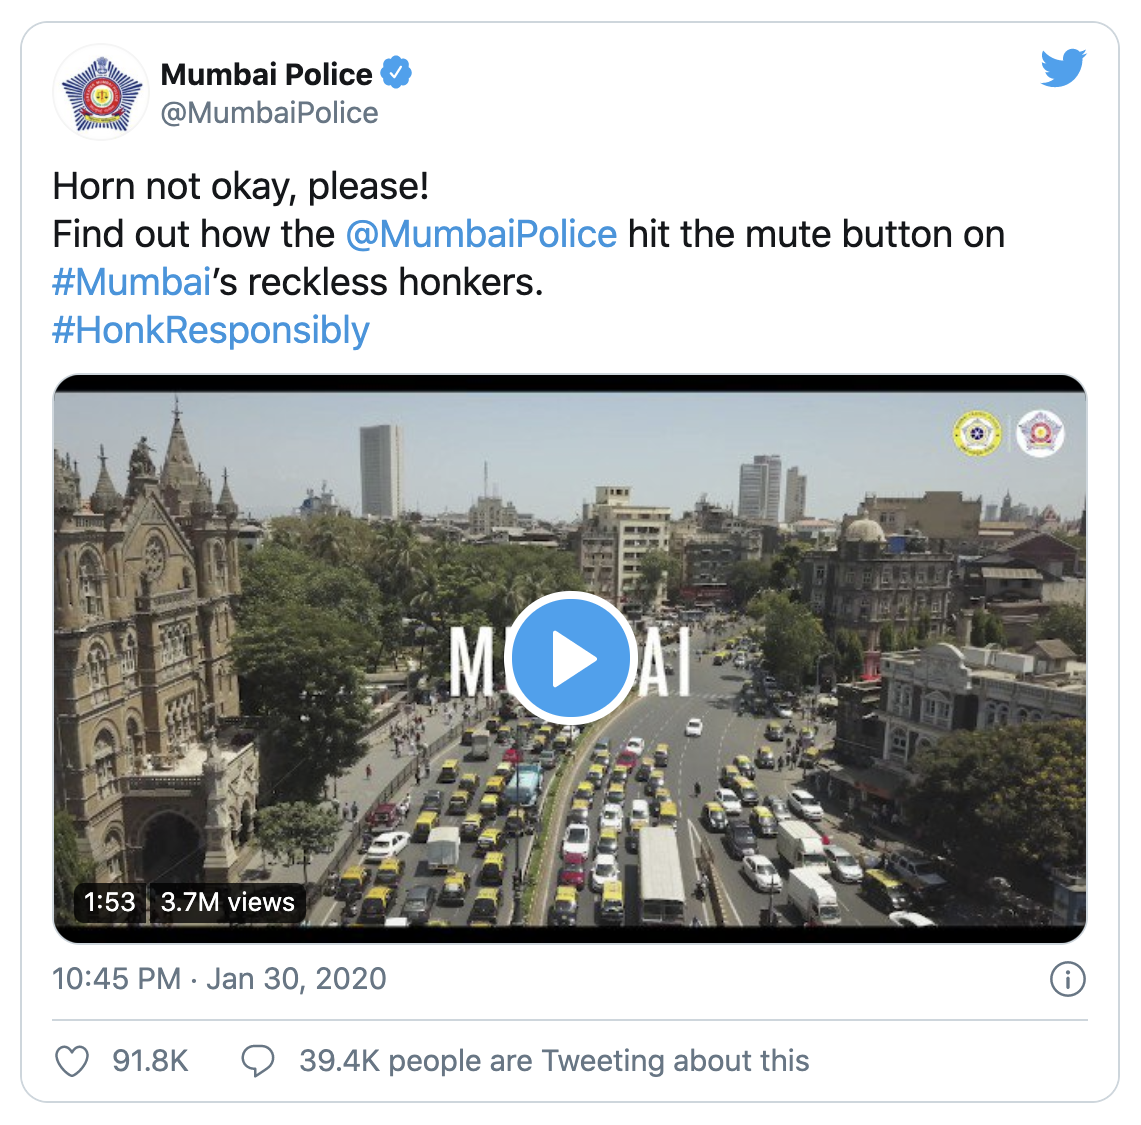 Image of a Tweet from Mumbai Police saying "Horn not okay, please!  Find out how the  @MumbaiPolice  hit the mute button on #Mumbai’s reckless honkers.  #HonkResponsibly"